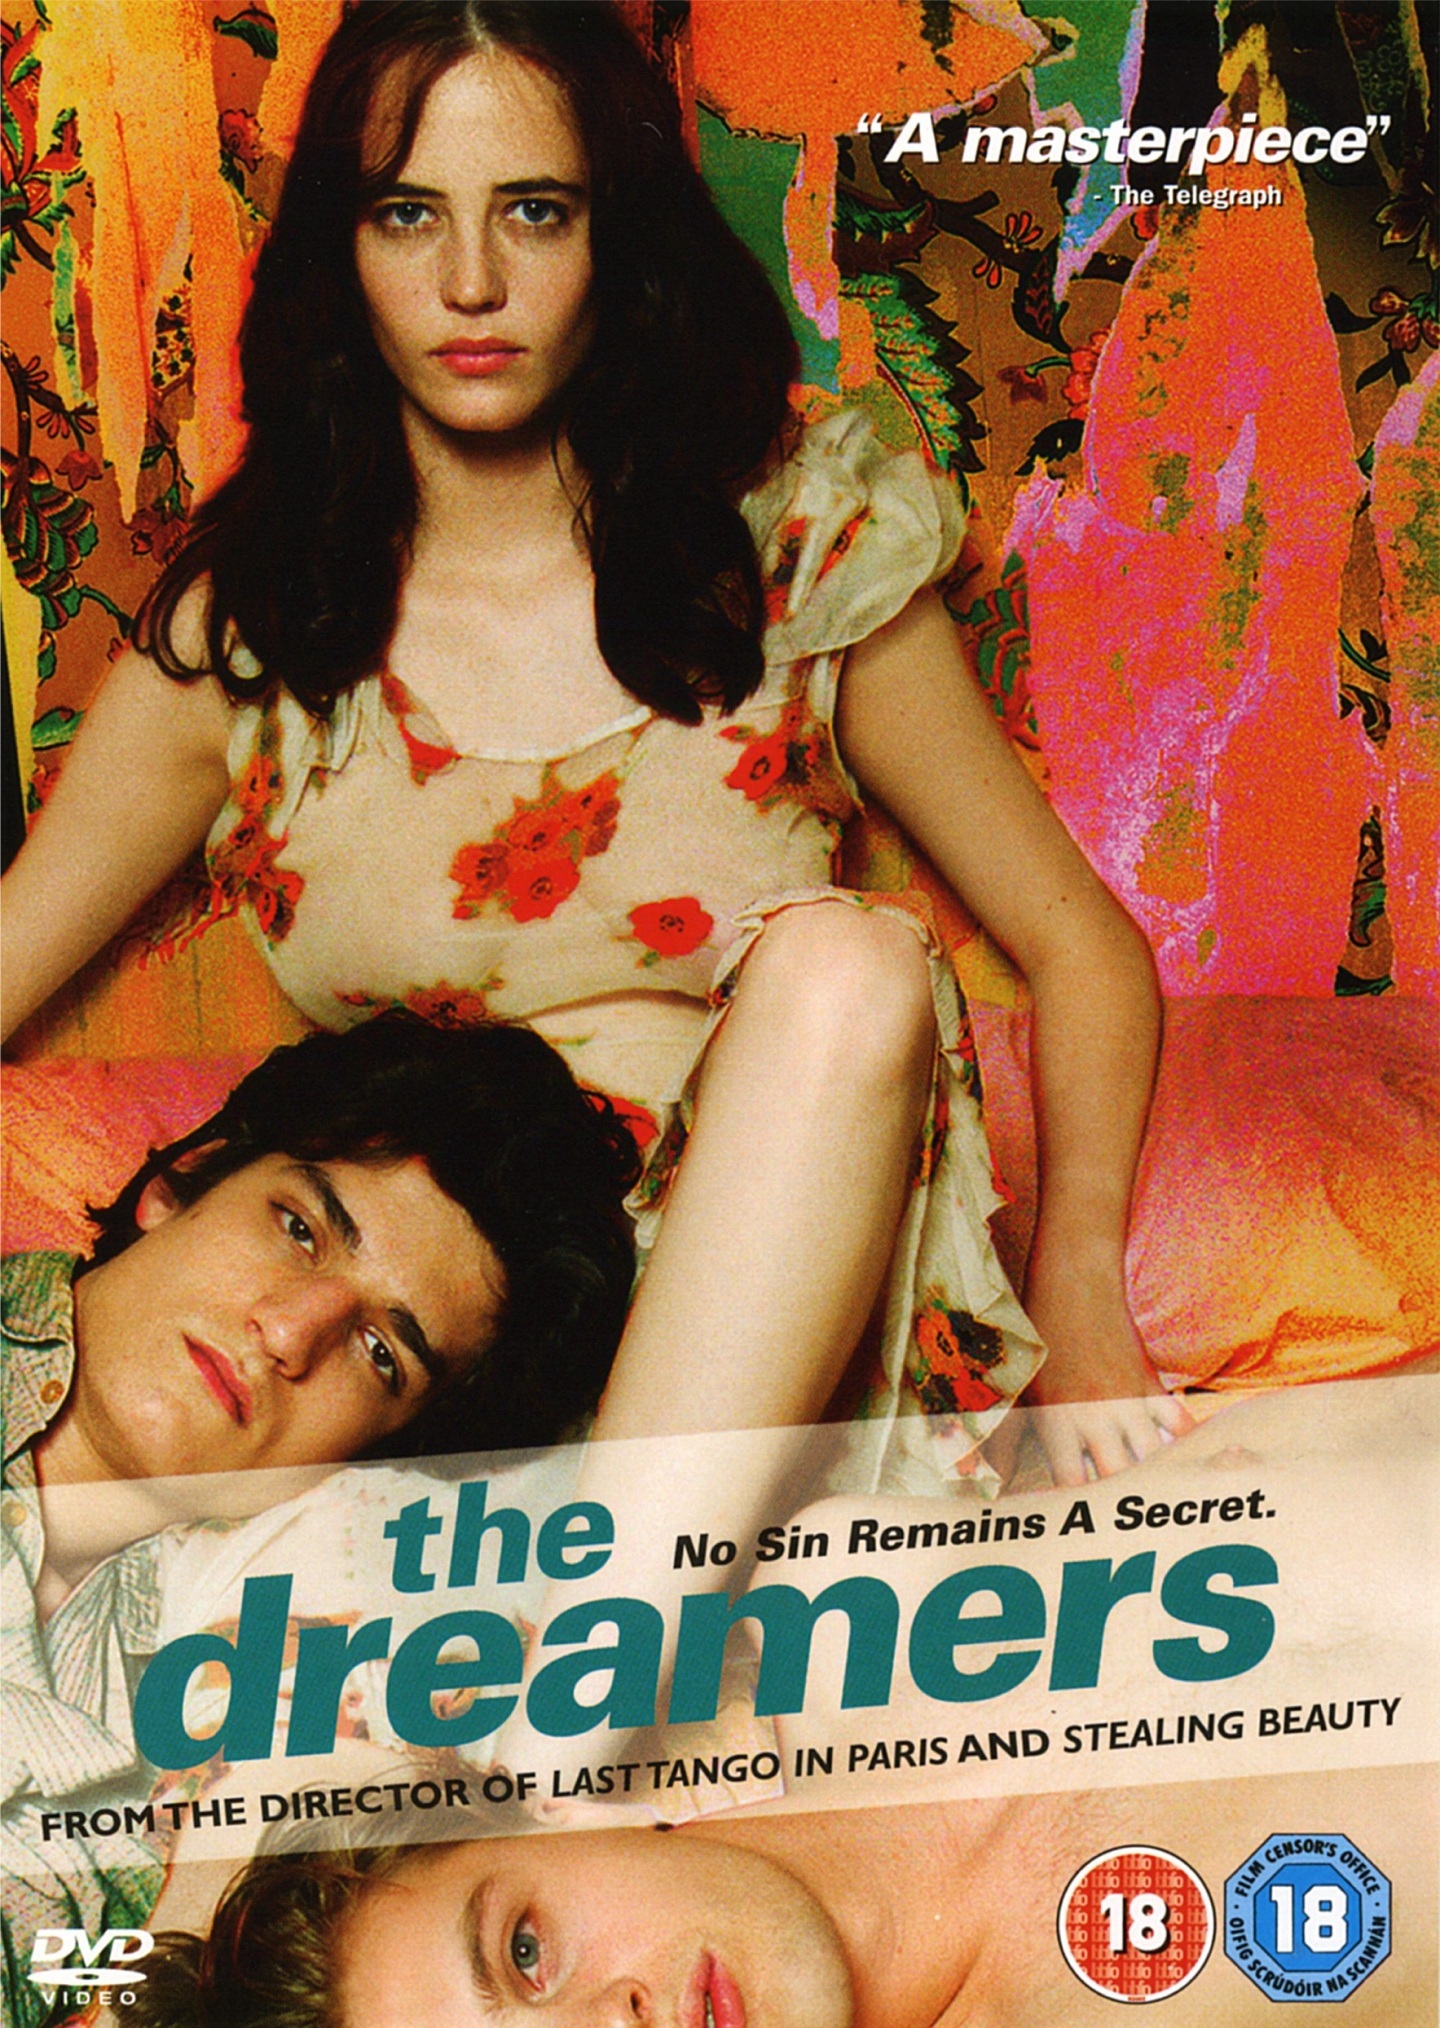 the-dreamers-front-1650120181.jpg